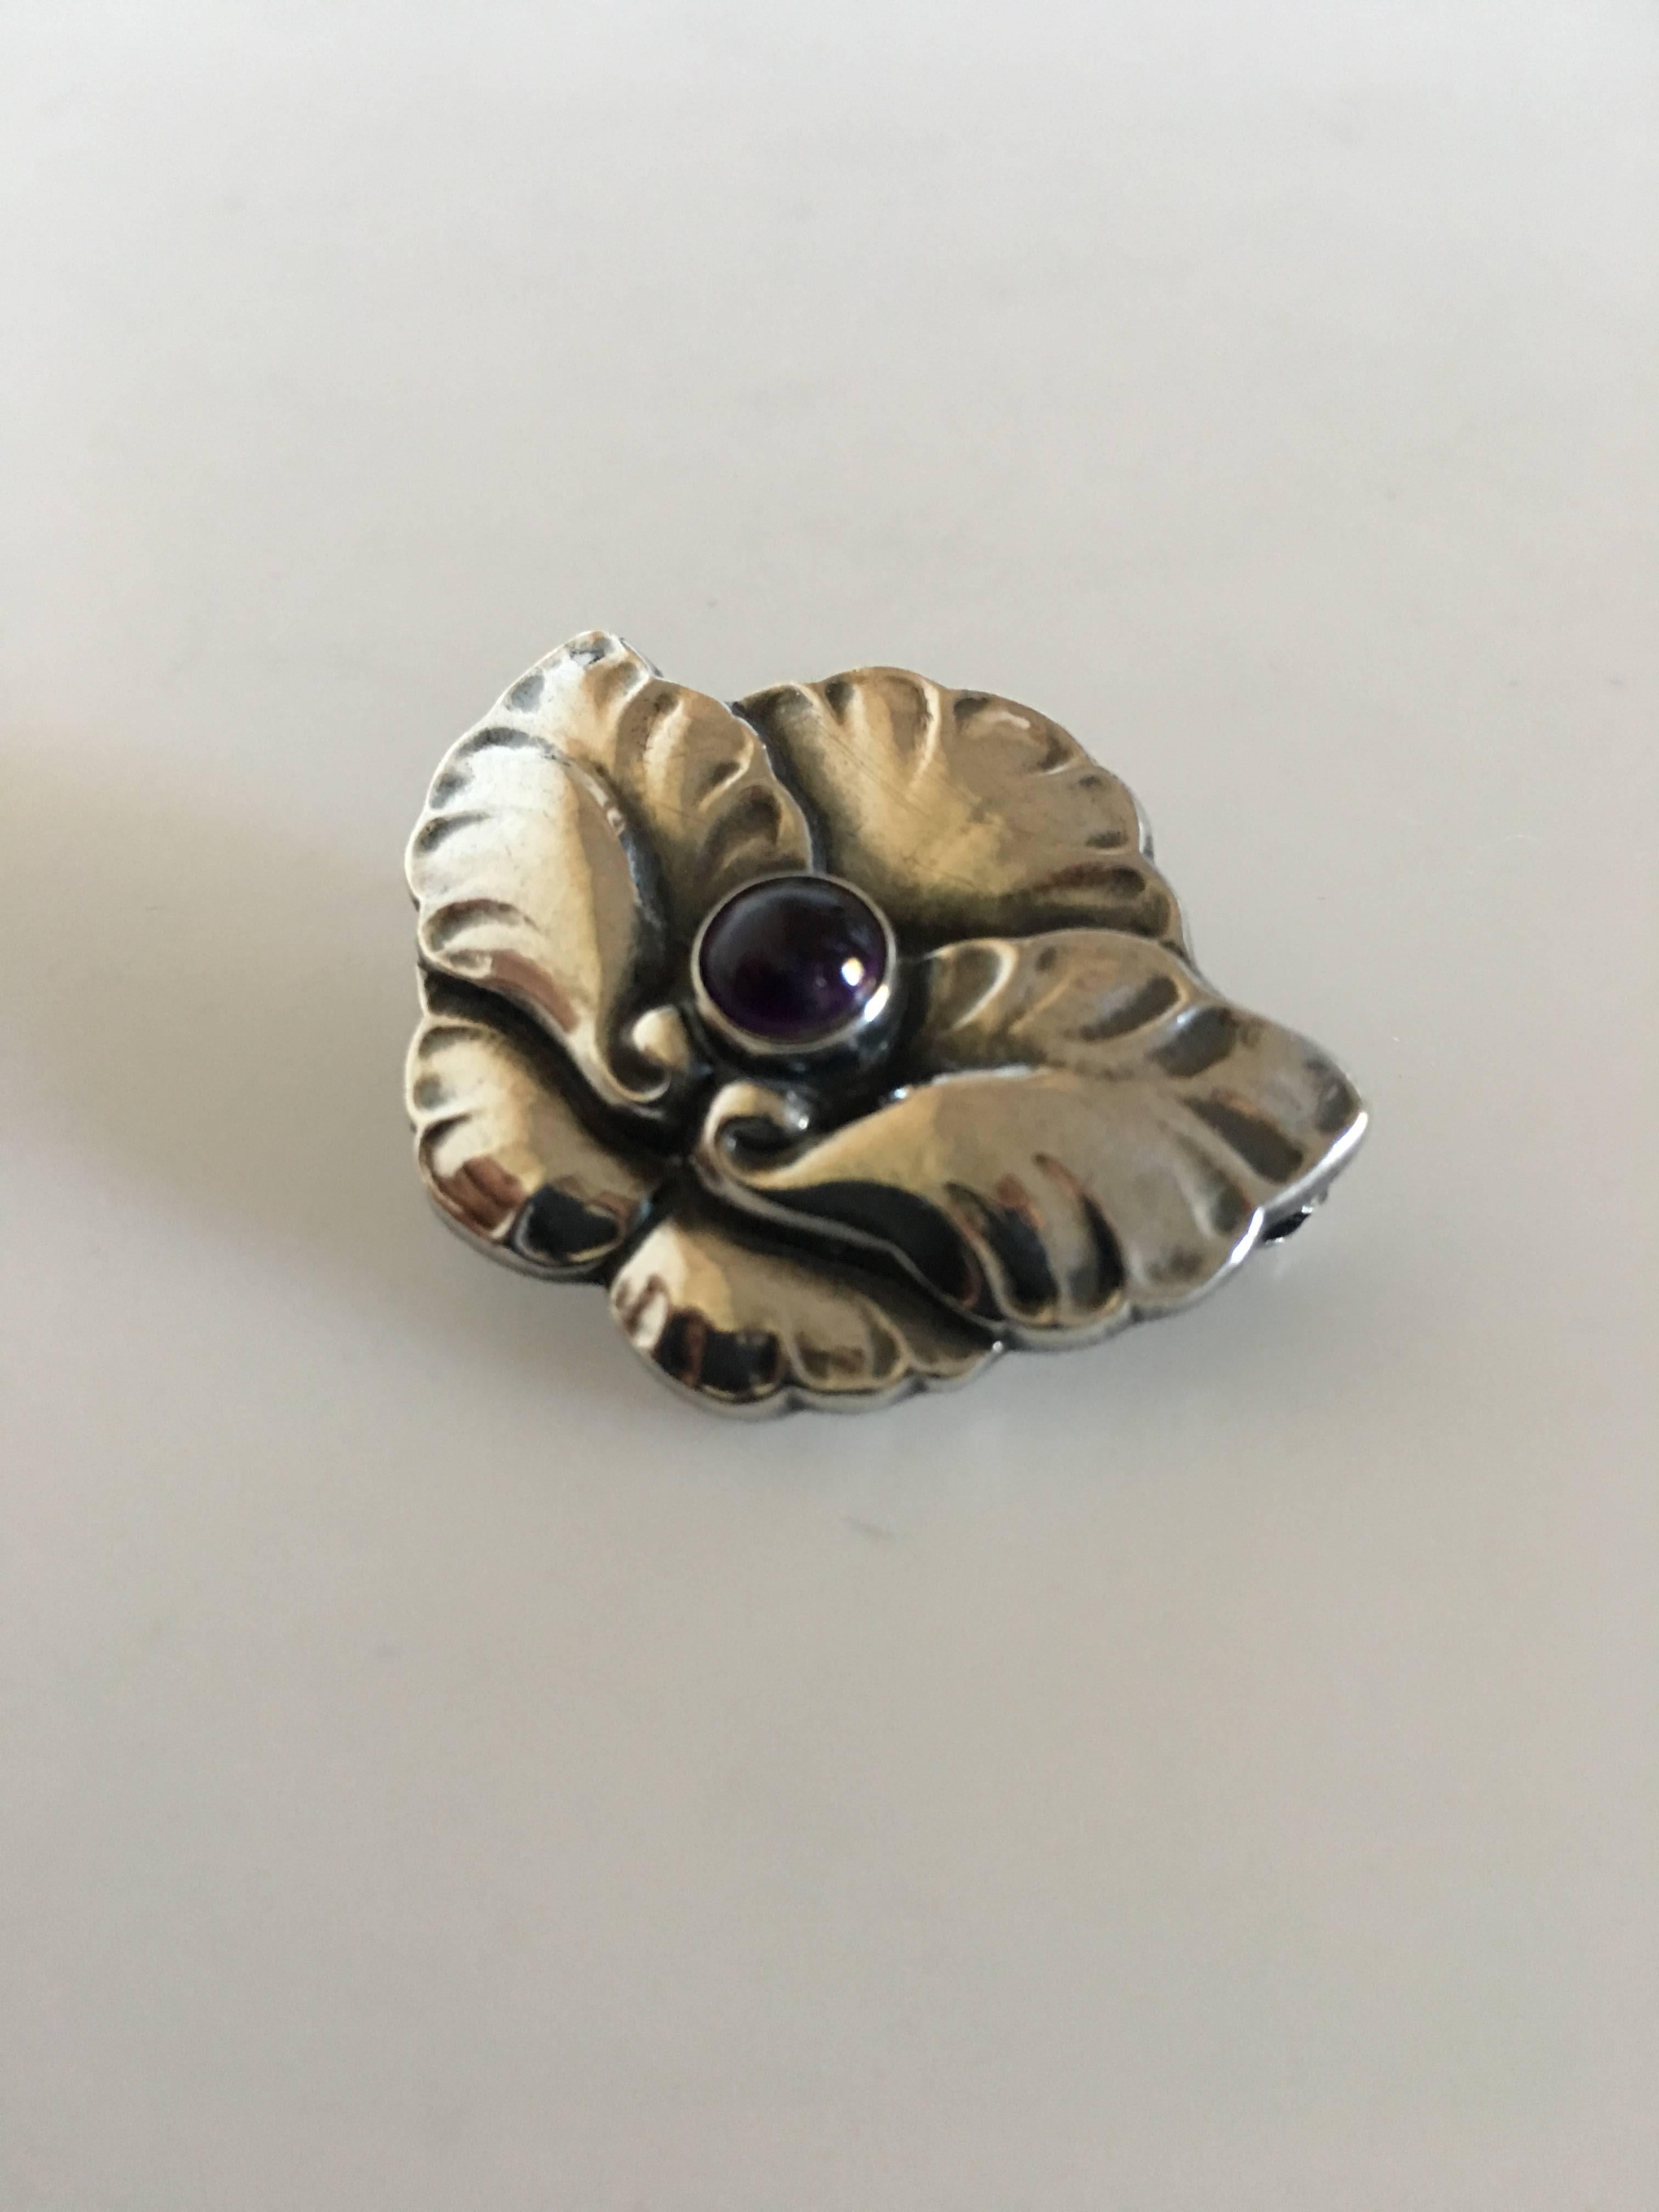 Georg Jensen Sterling Silver Brooch No. 407 with Amethyst. 3.5 cm. Weighs 8 grams. From after 1945.